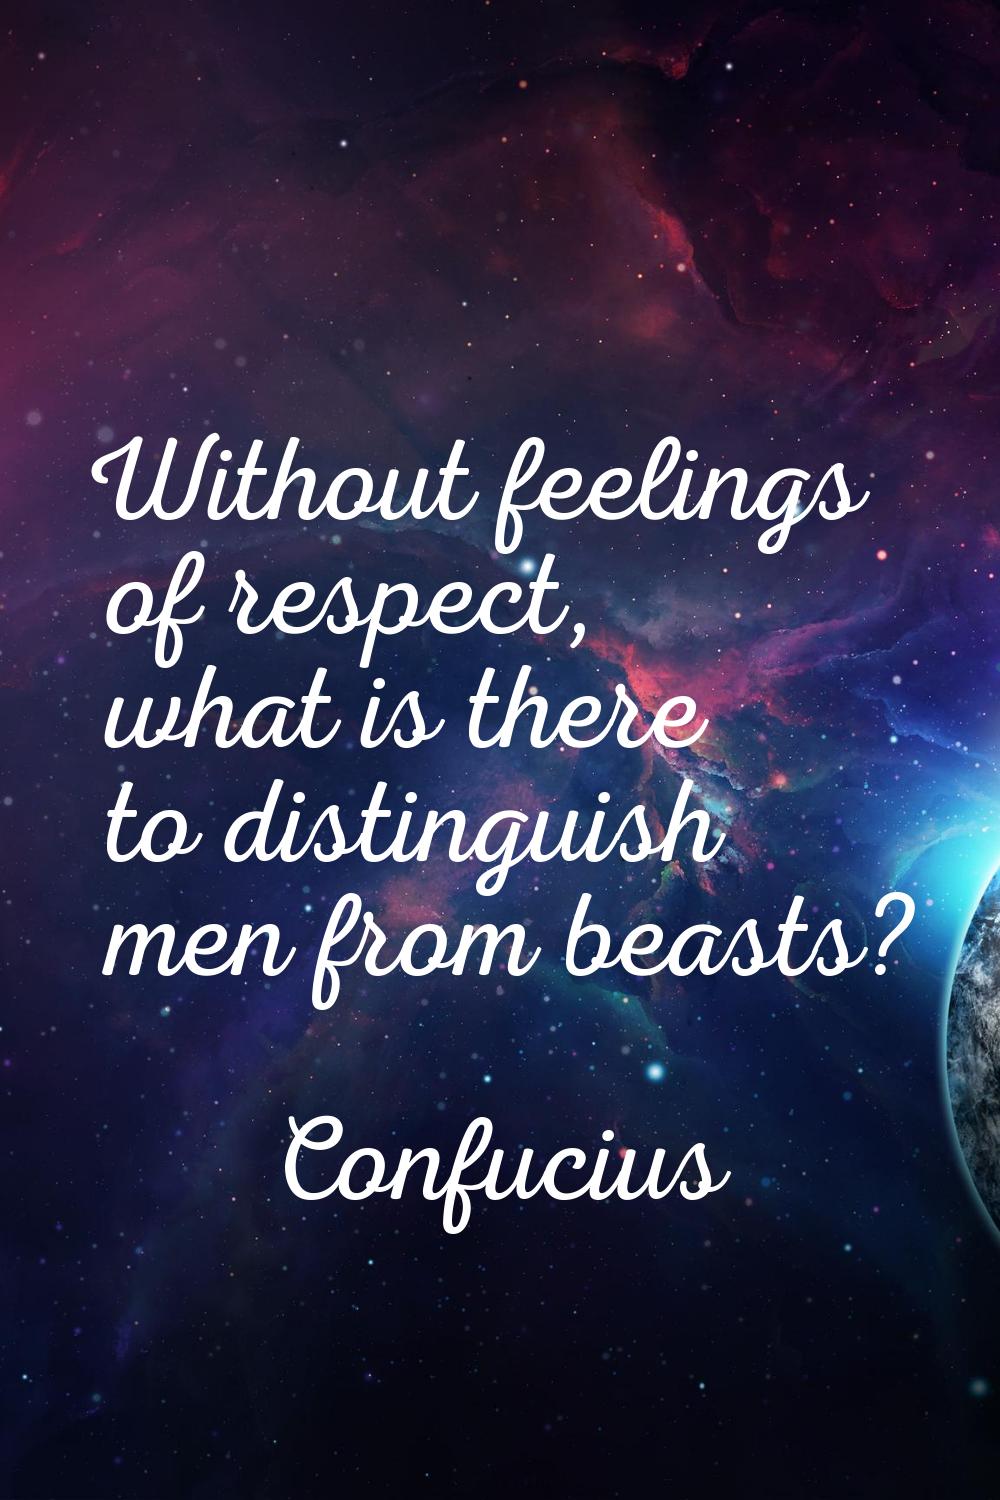 Without feelings of respect, what is there to distinguish men from beasts?